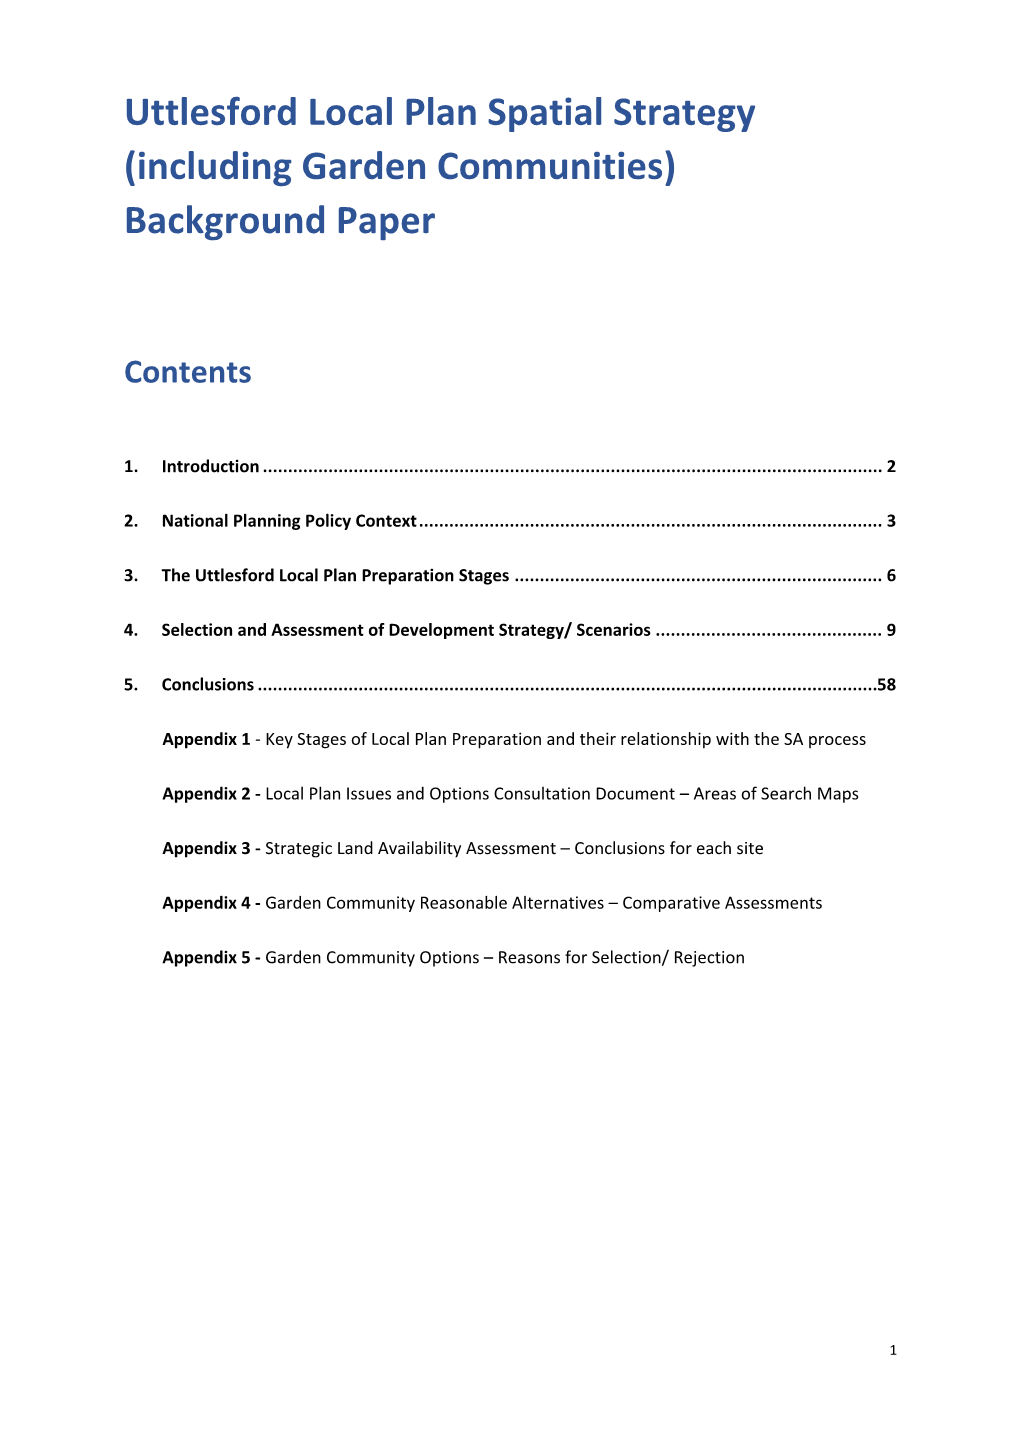 Uttlesford Local Plan Spatial Strategy (Including Garden Communities) Background Paper